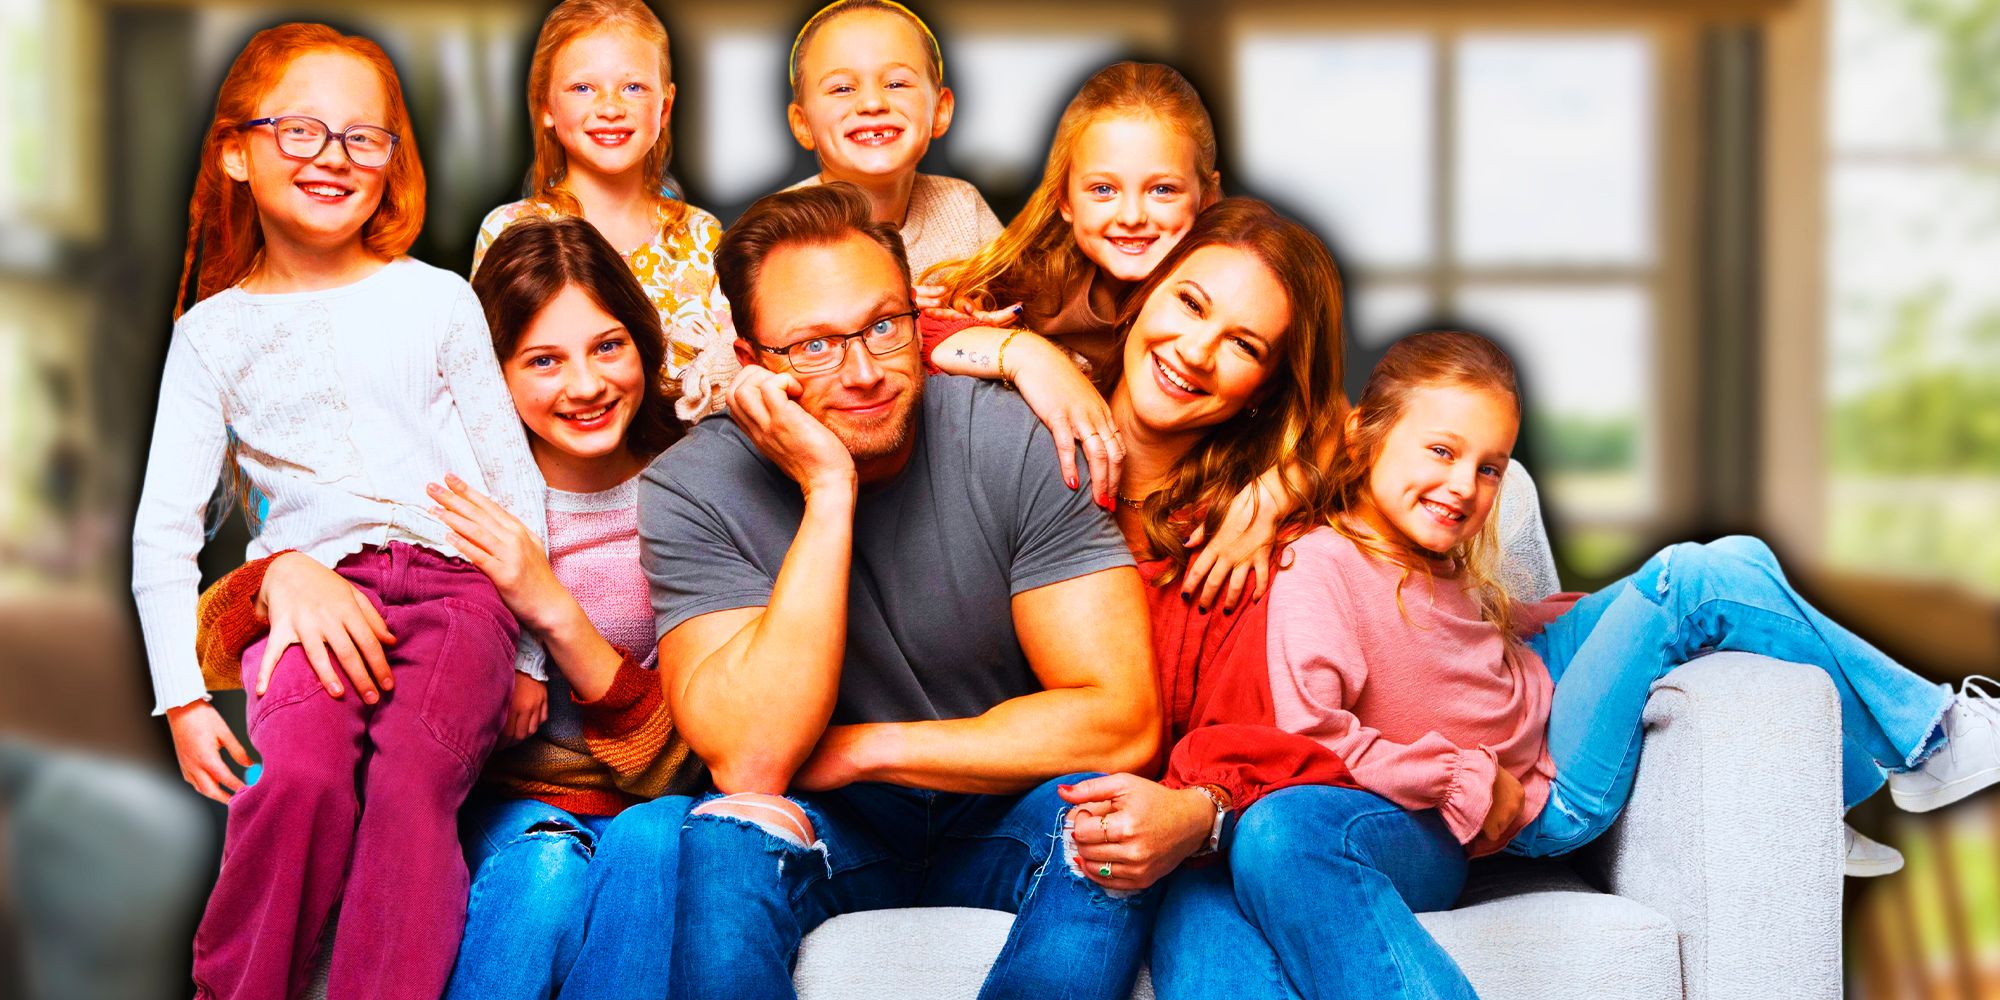 OutDaughtered Cast Adam, Danielle,  Blayke, Ava, Olivia, Hazel, Riley, and Parker in promo pic